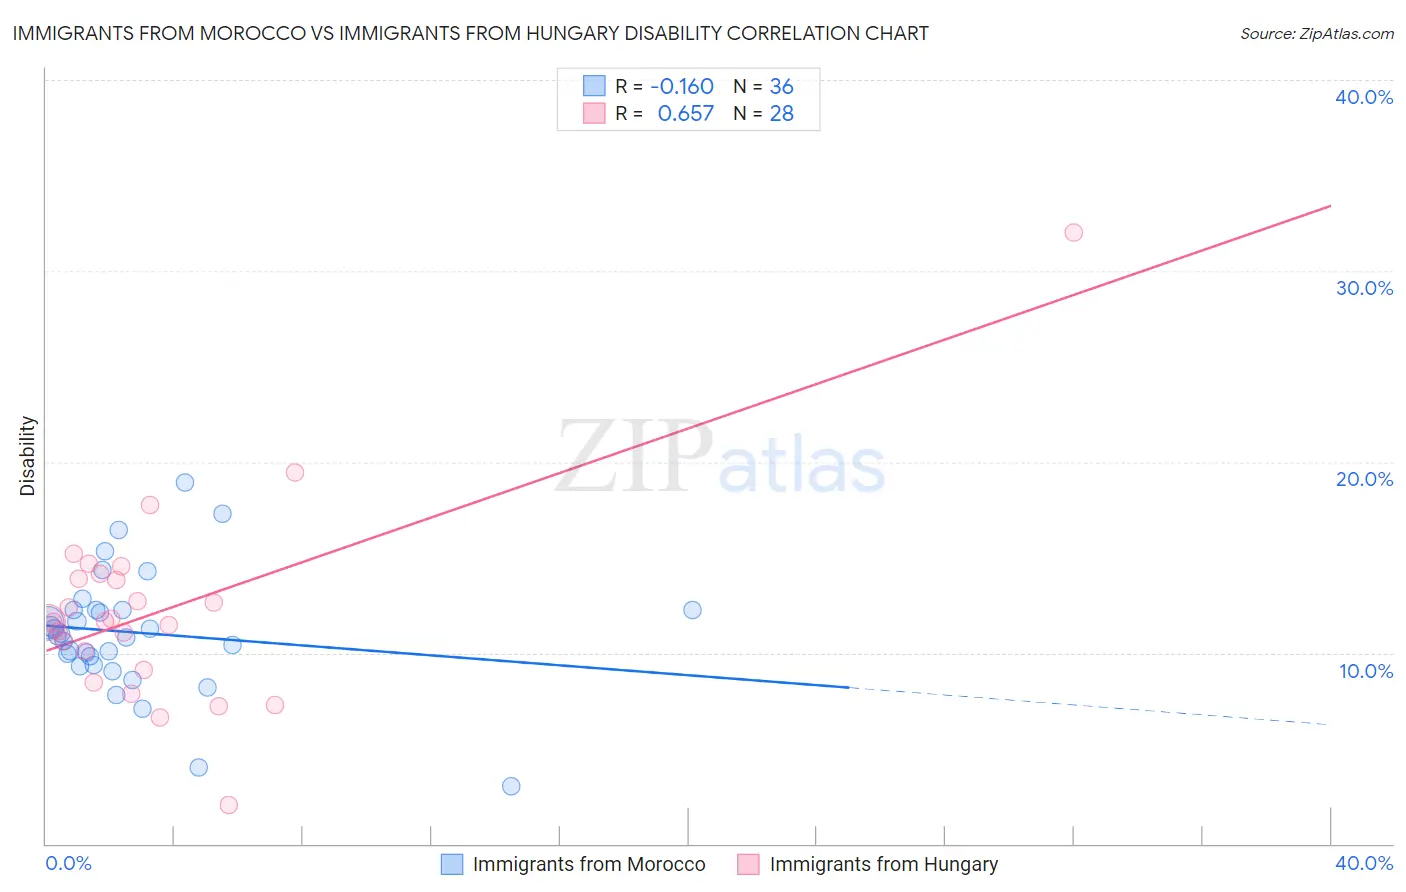 Immigrants from Morocco vs Immigrants from Hungary Disability